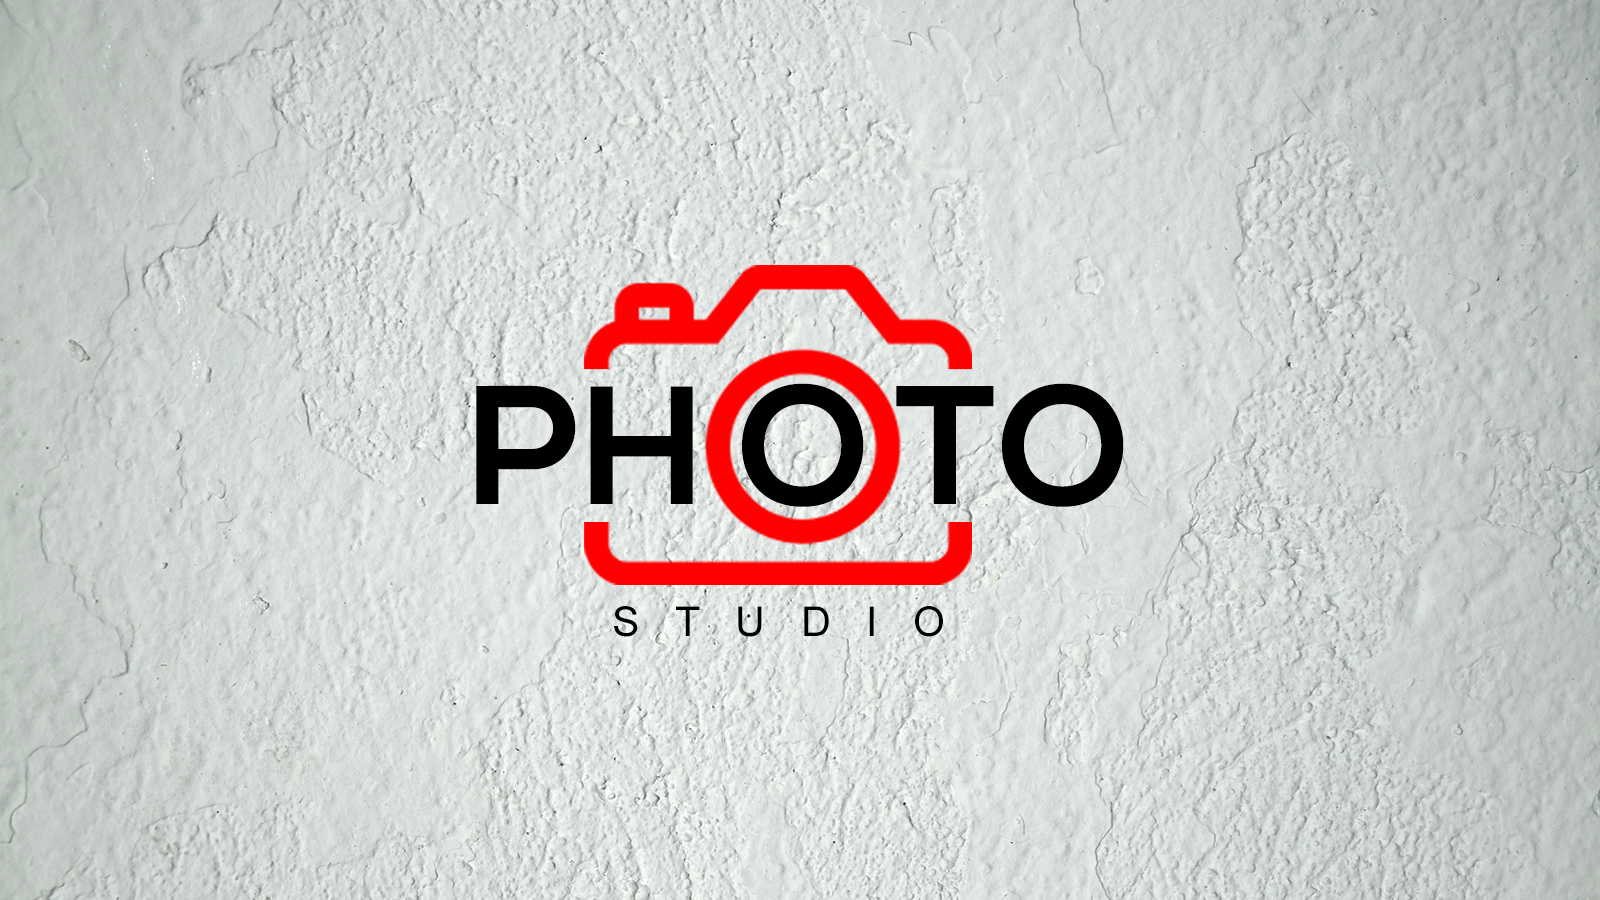 How to Easily Design A Photography Logo - Photoshop Tutorial